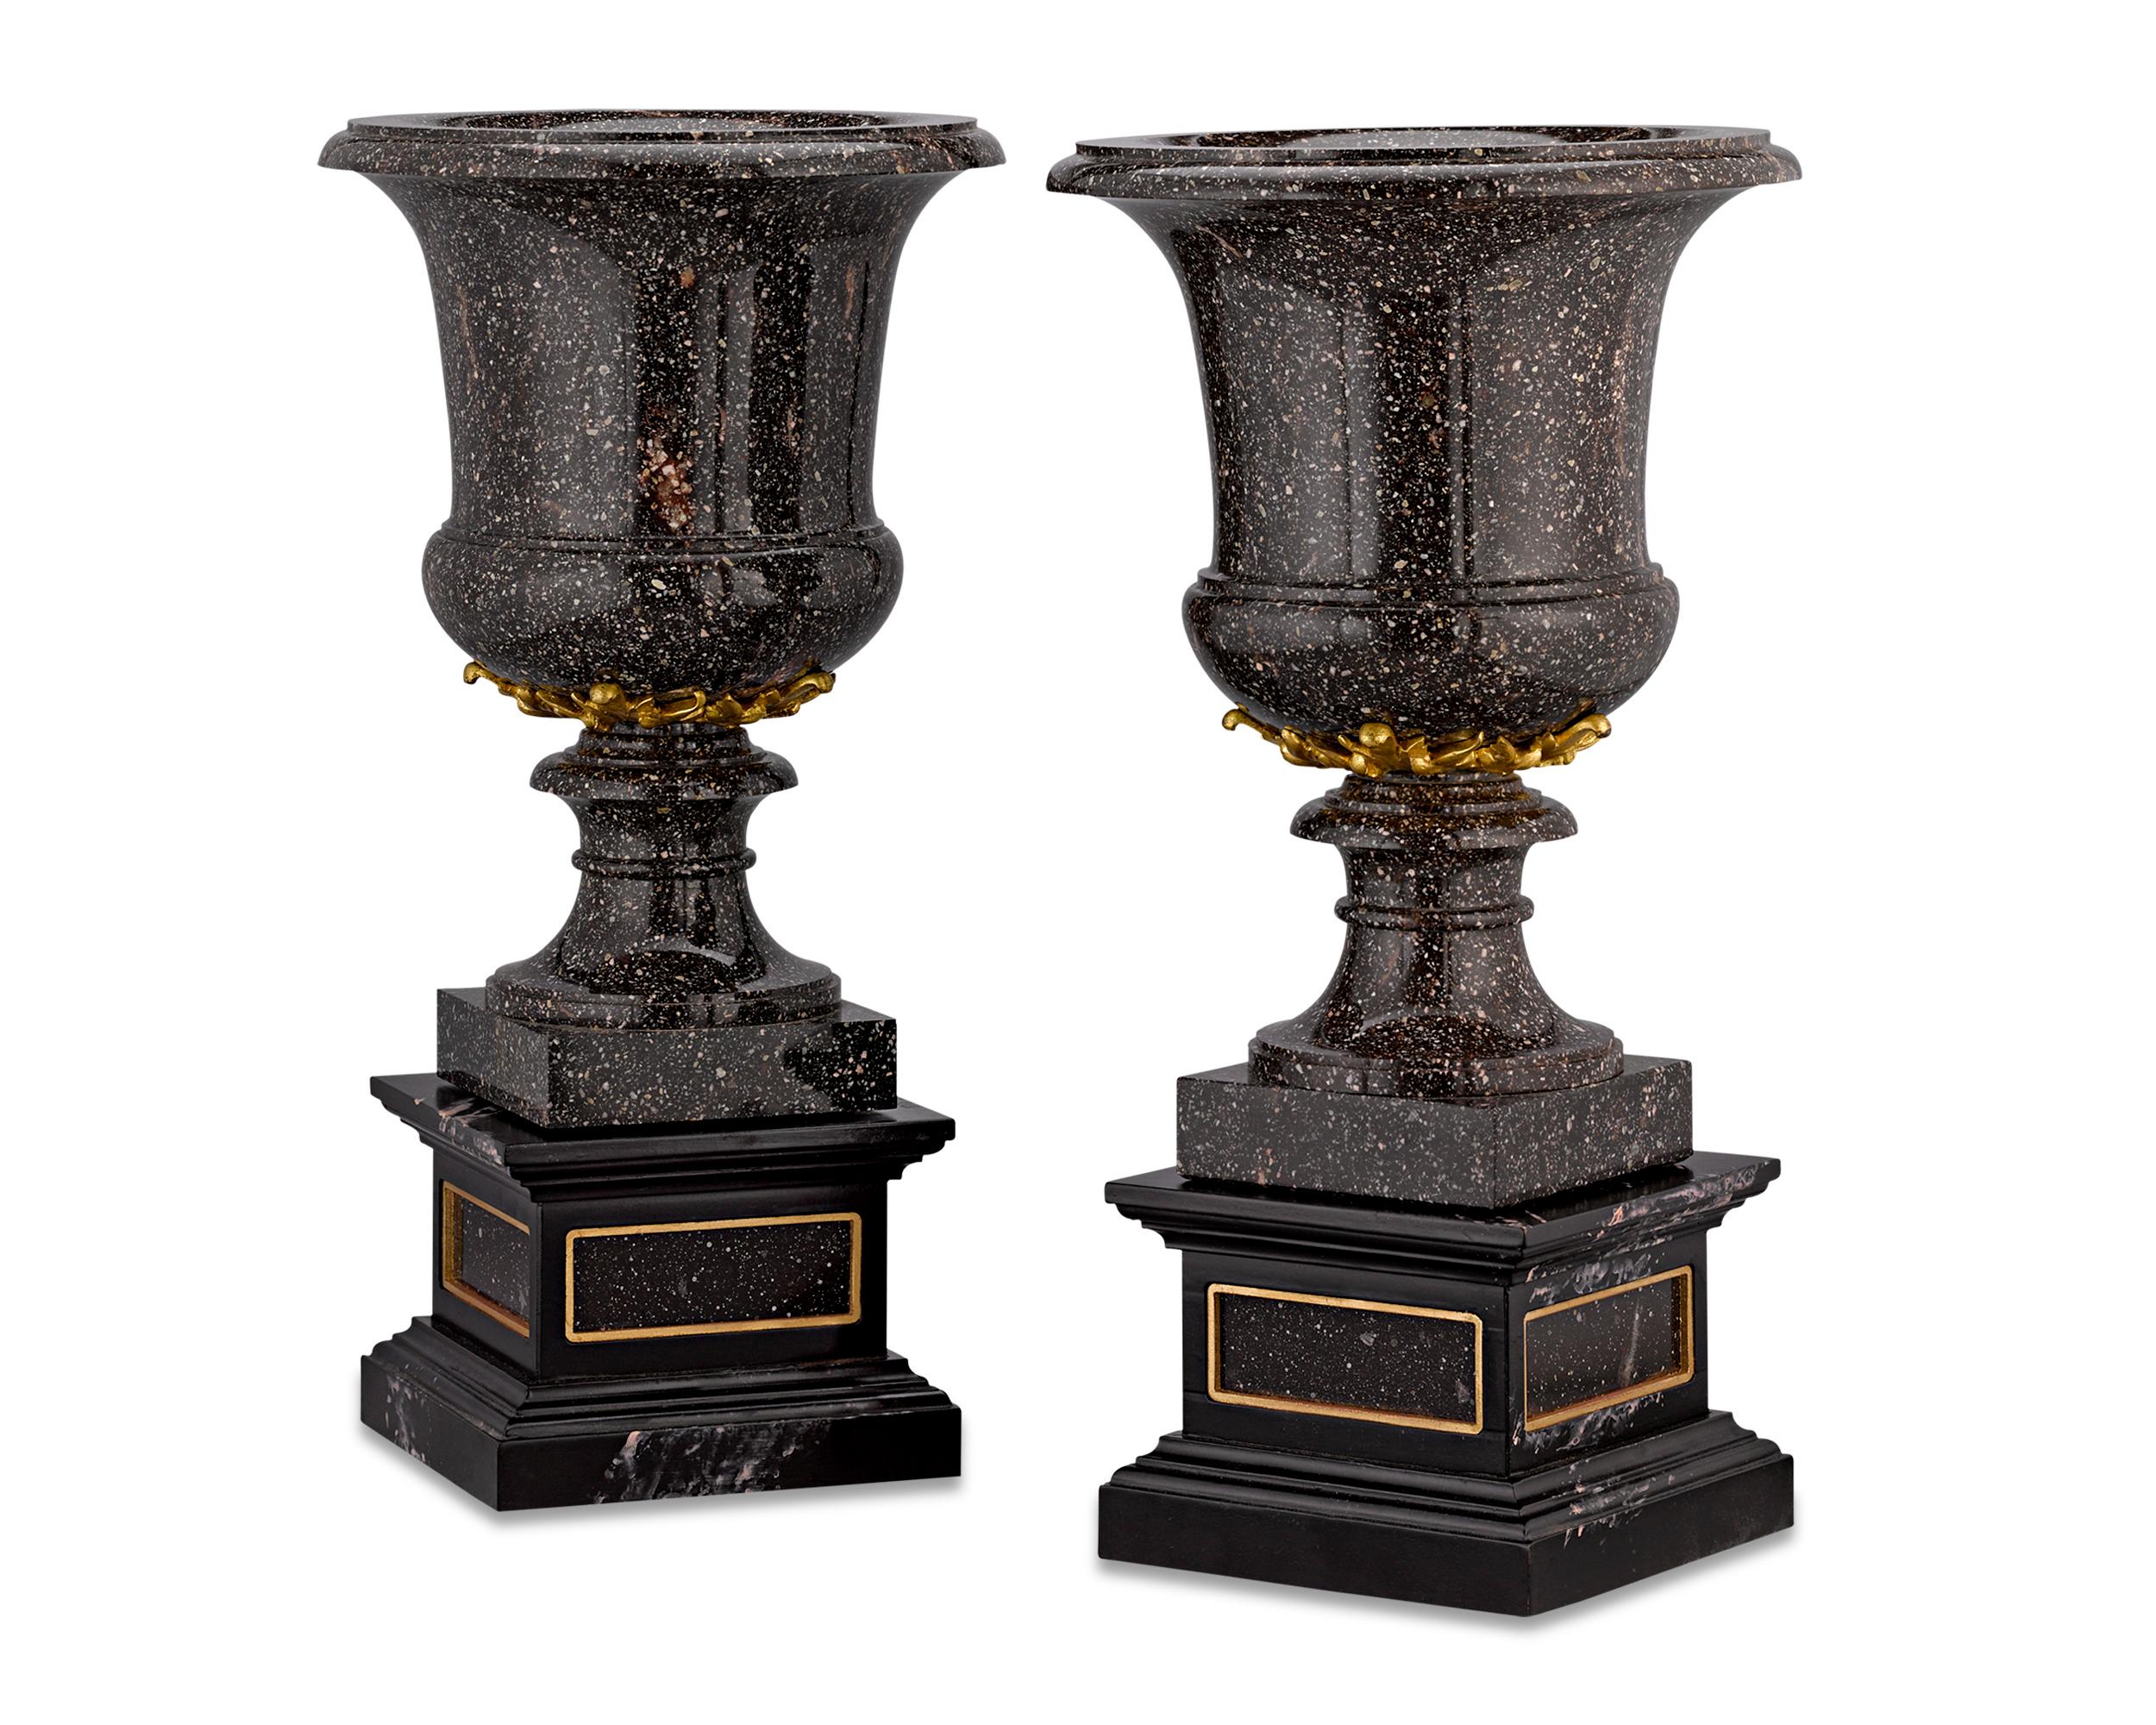 These impressive Blyberg porphyry vases demonstrate the strength and beauty that has made porphyry a prized material since antiquity. Porphyry is renowned not just for its regal red or purple hue, but also its incredible hardness, making the